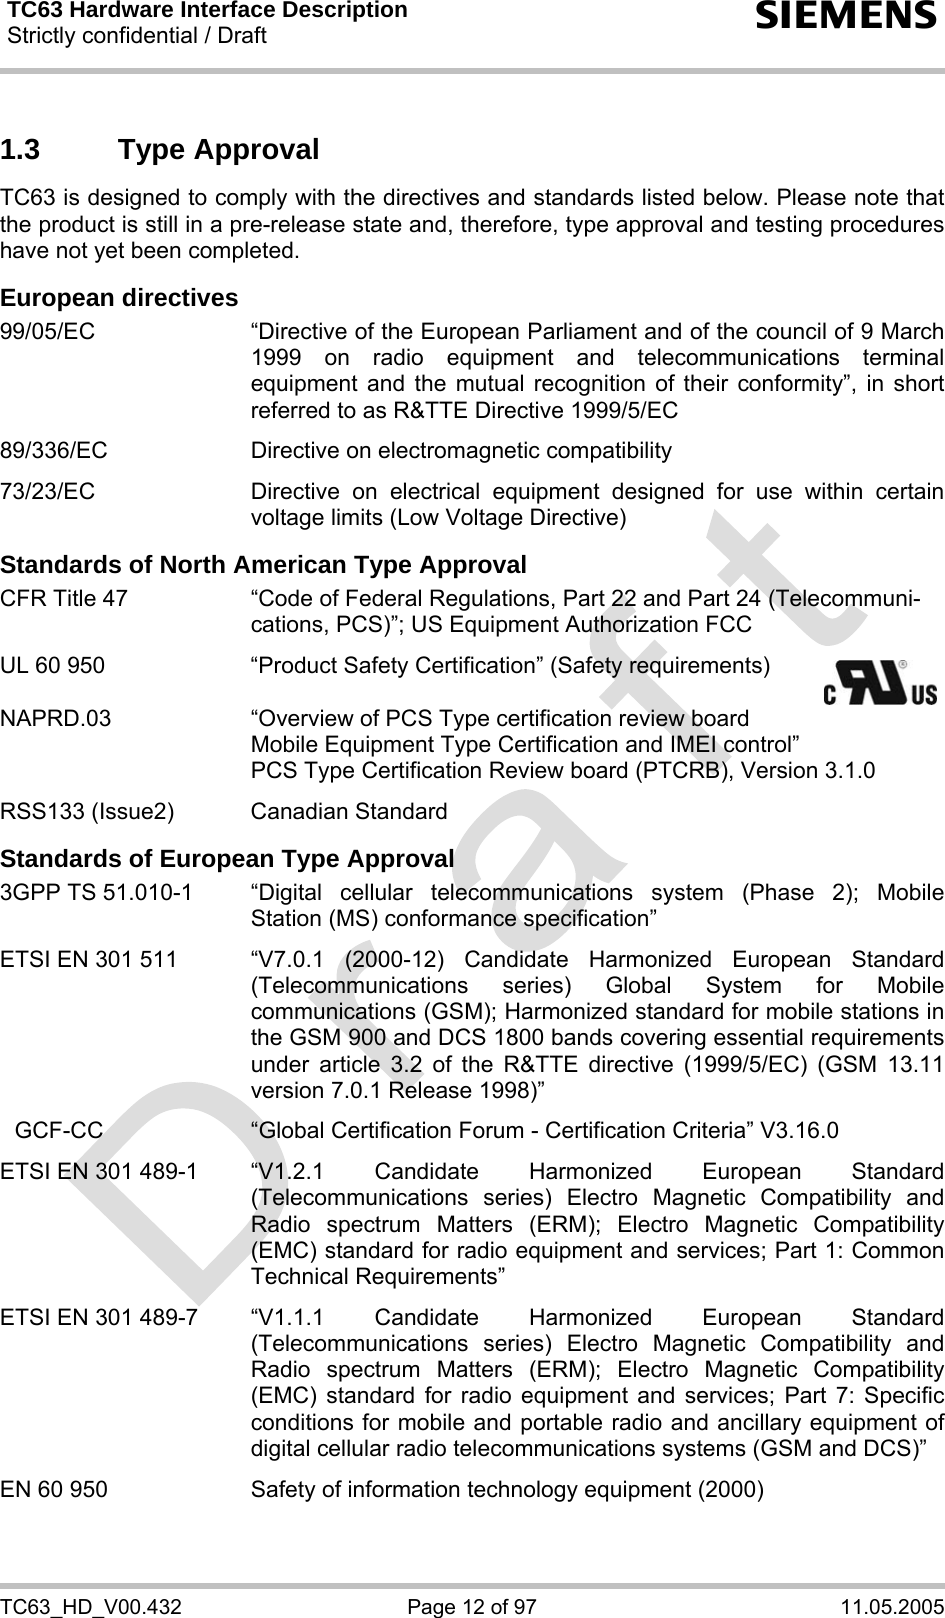 TC63 Hardware Interface Description Strictly confidential / Draft  s TC63_HD_V00.432  Page 12 of 97  11.05.2005 1.3 Type Approval TC63 is designed to comply with the directives and standards listed below. Please note that the product is still in a pre-release state and, therefore, type approval and testing procedures have not yet been completed.  European directives 99/05/EC  “Directive of the European Parliament and of the council of 9 March 1999 on radio equipment and telecommunications terminal equipment and the mutual recognition of their conformity”, in short referred to as R&amp;TTE Directive 1999/5/EC  89/336/EC  Directive on electromagnetic compatibility  73/23/EC  Directive on electrical equipment designed for use within certain voltage limits (Low Voltage Directive)  Standards of North American Type Approval CFR Title 47  “Code of Federal Regulations, Part 22 and Part 24 (Telecommuni-cations, PCS)”; US Equipment Authorization FCC  UL 60 950  “Product Safety Certification” (Safety requirements)      NAPRD.03  “Overview of PCS Type certification review board      Mobile Equipment Type Certification and IMEI control”     PCS Type Certification Review board (PTCRB), Version 3.1.0  RSS133 (Issue2)  Canadian Standard  Standards of European Type Approval 3GPP TS 51.010-1  “Digital  cellular  telecommunications system (Phase 2); Mobile Station (MS) conformance specification”  ETSI EN 301 511  “V7.0.1  (2000-12)  Candidate  Harmonized  European  Standard (Telecommunications series) Global System for Mobile communications (GSM); Harmonized standard for mobile stations in the GSM 900 and DCS 1800 bands covering essential requirements under article 3.2 of the R&amp;TTE directive (1999/5/EC) (GSM 13.11 version 7.0.1 Release 1998)”   GCF-CC  “Global Certification Forum - Certification Criteria” V3.16.0   ETSI EN 301 489-1  “V1.2.1  Candidate  Harmonized  European  Standard (Telecommunications series) Electro Magnetic Compatibility and Radio spectrum Matters (ERM); Electro Magnetic Compatibility (EMC) standard for radio equipment and services; Part 1: Common Technical Requirements”  ETSI EN 301 489-7  “V1.1.1  Candidate  Harmonized  European  Standard (Telecommunications series) Electro Magnetic Compatibility and Radio spectrum Matters (ERM); Electro Magnetic Compatibility (EMC) standard for radio equipment and services; Part 7: Specific conditions for mobile and portable radio and ancillary equipment of digital cellular radio telecommunications systems (GSM and DCS)”   EN 60 950  Safety of information technology equipment (2000)  